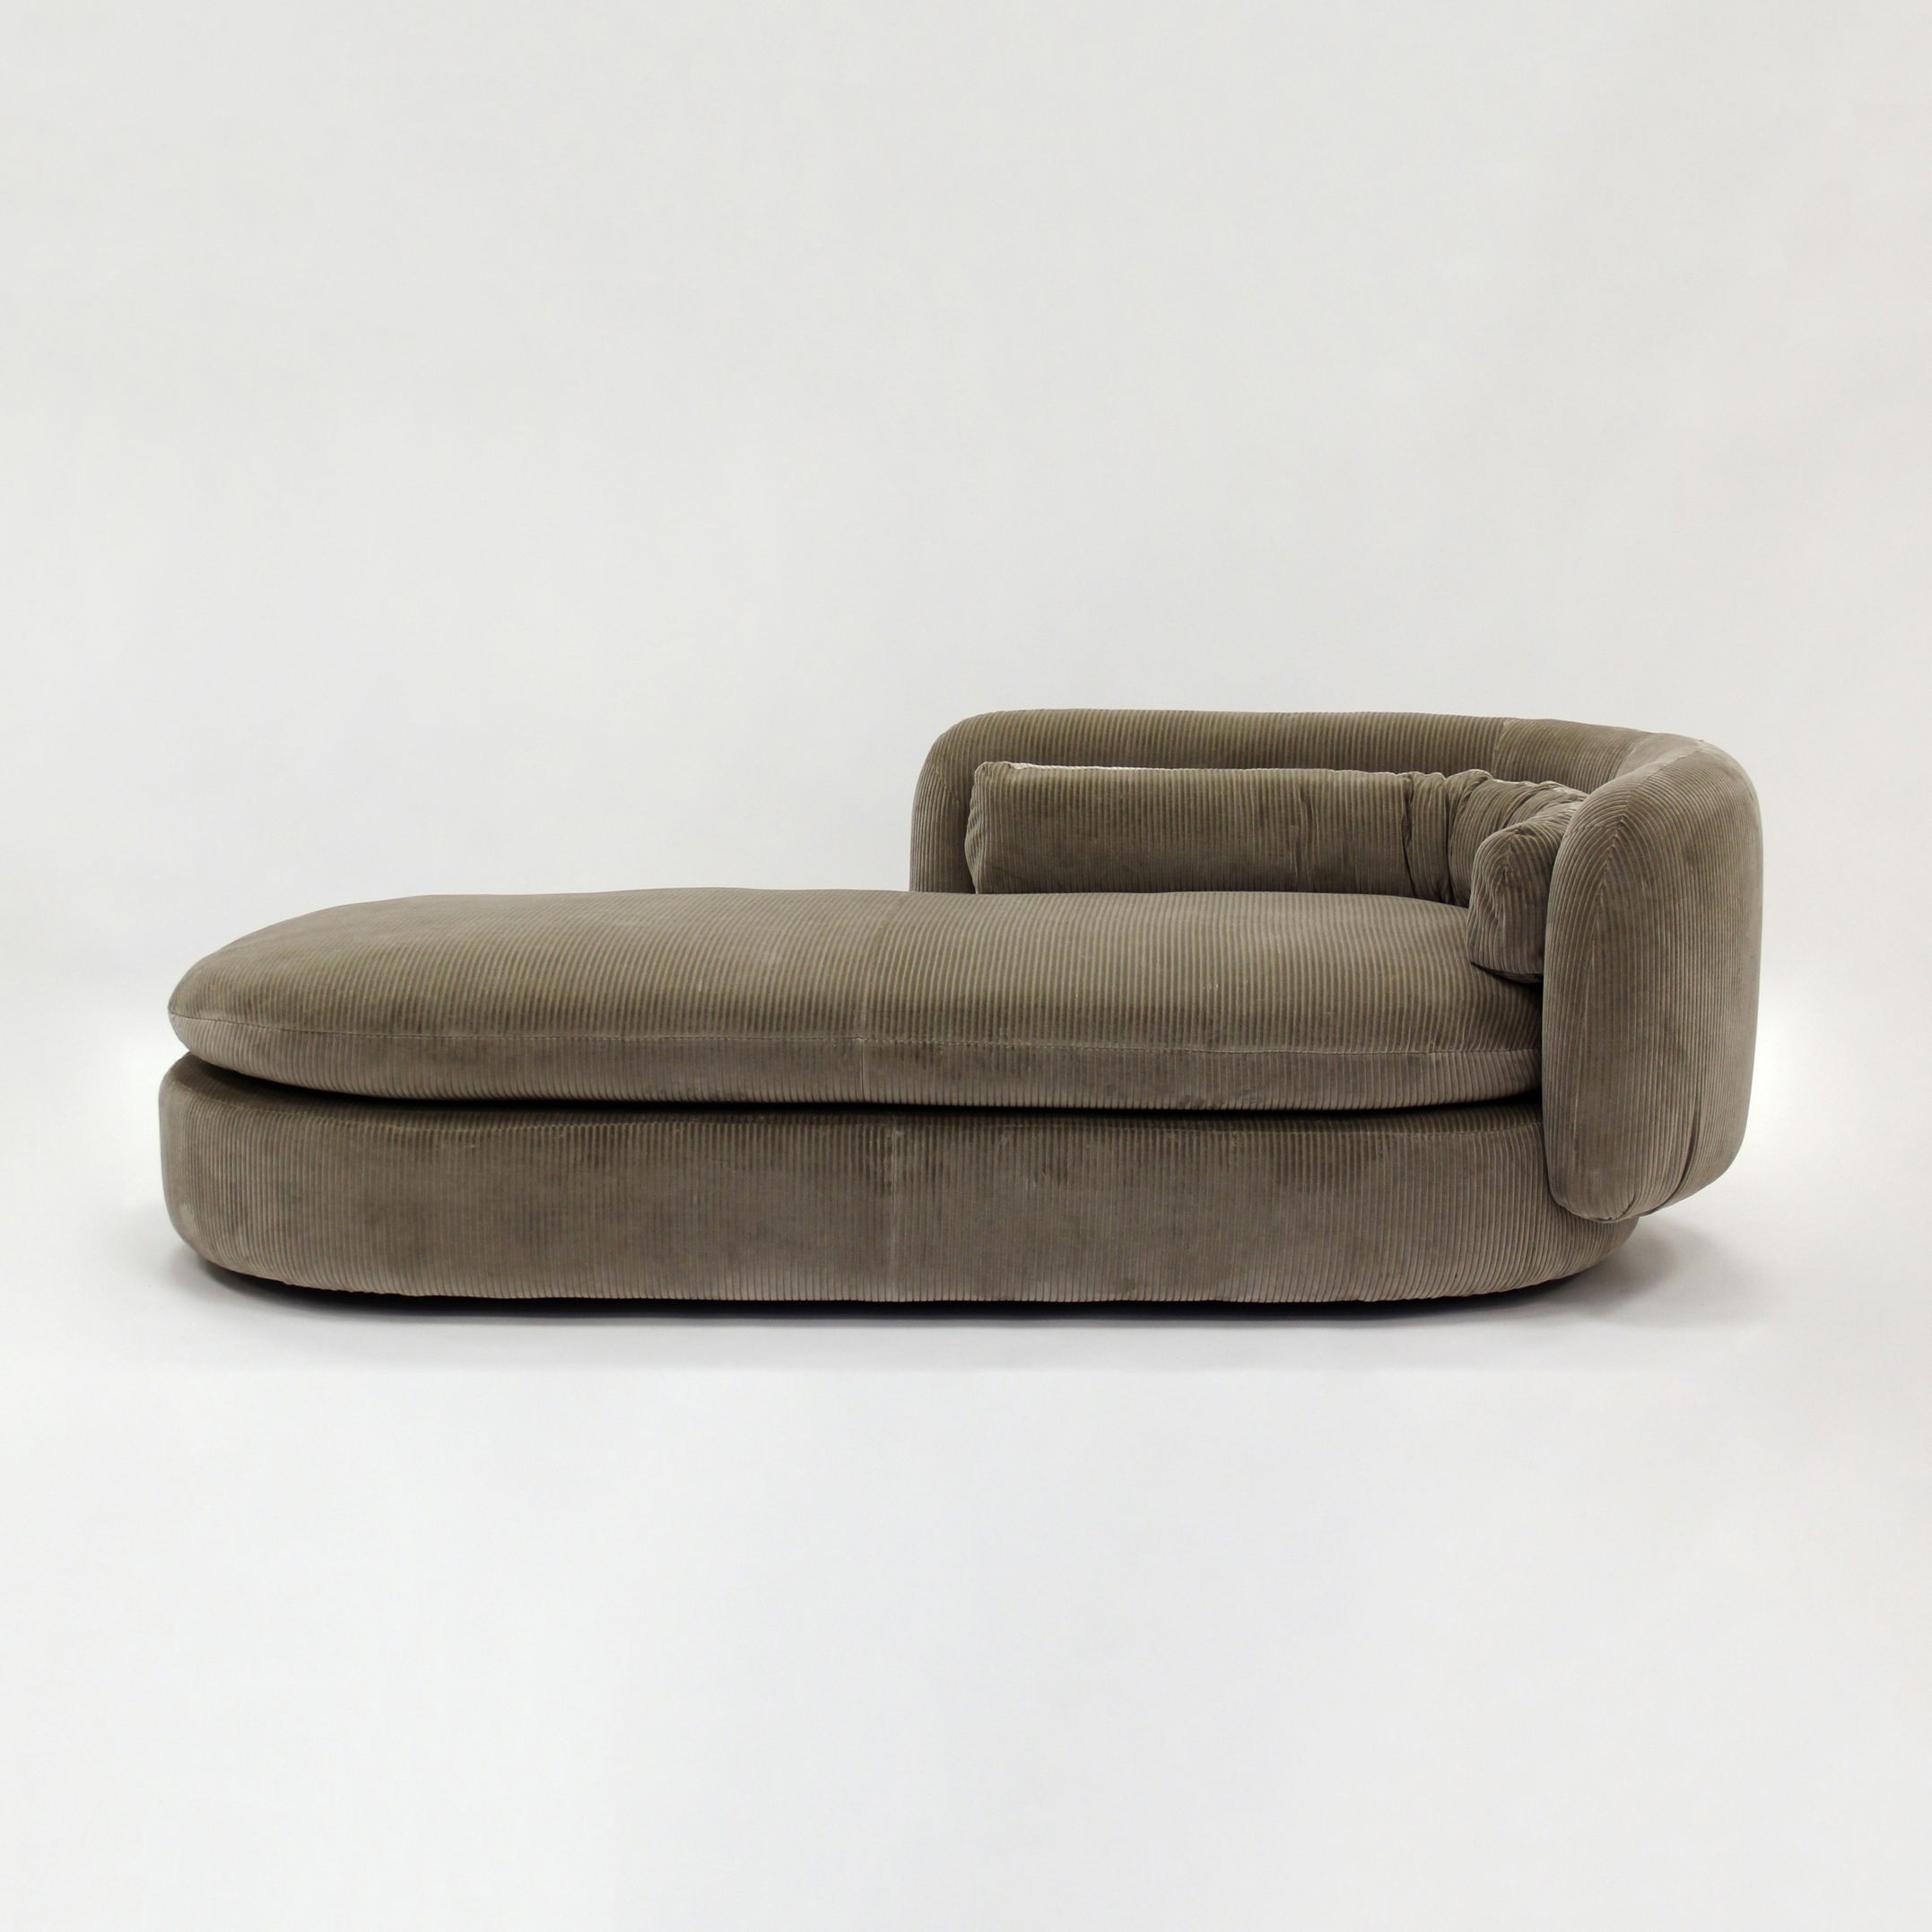 The Comfort and Versatility of a Chaise Lounge Sofa Bed